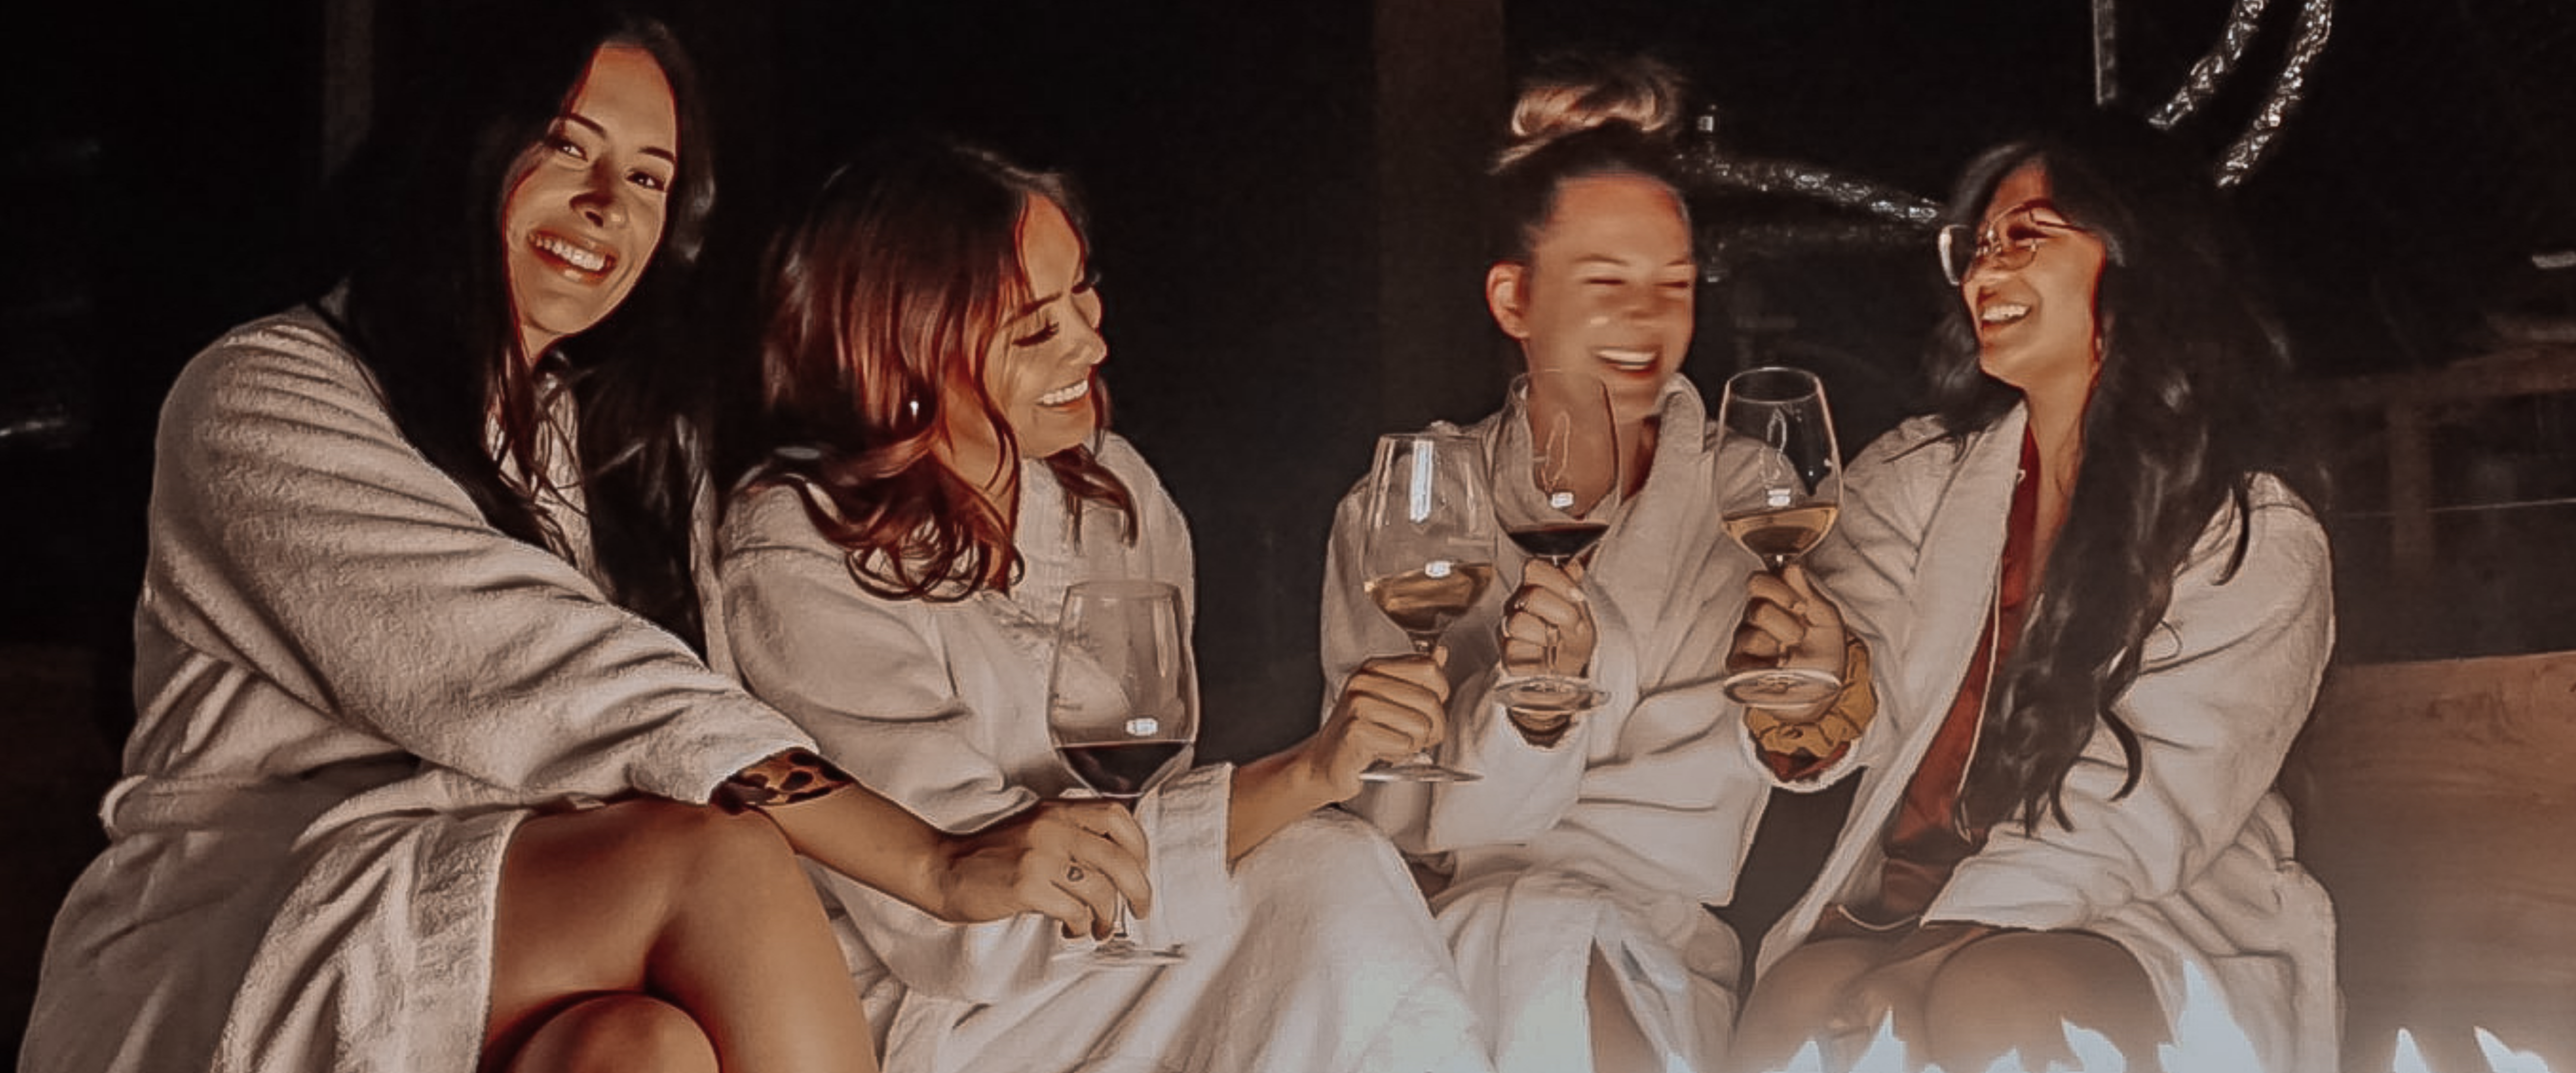 Group of four girls drinking wine by the fire